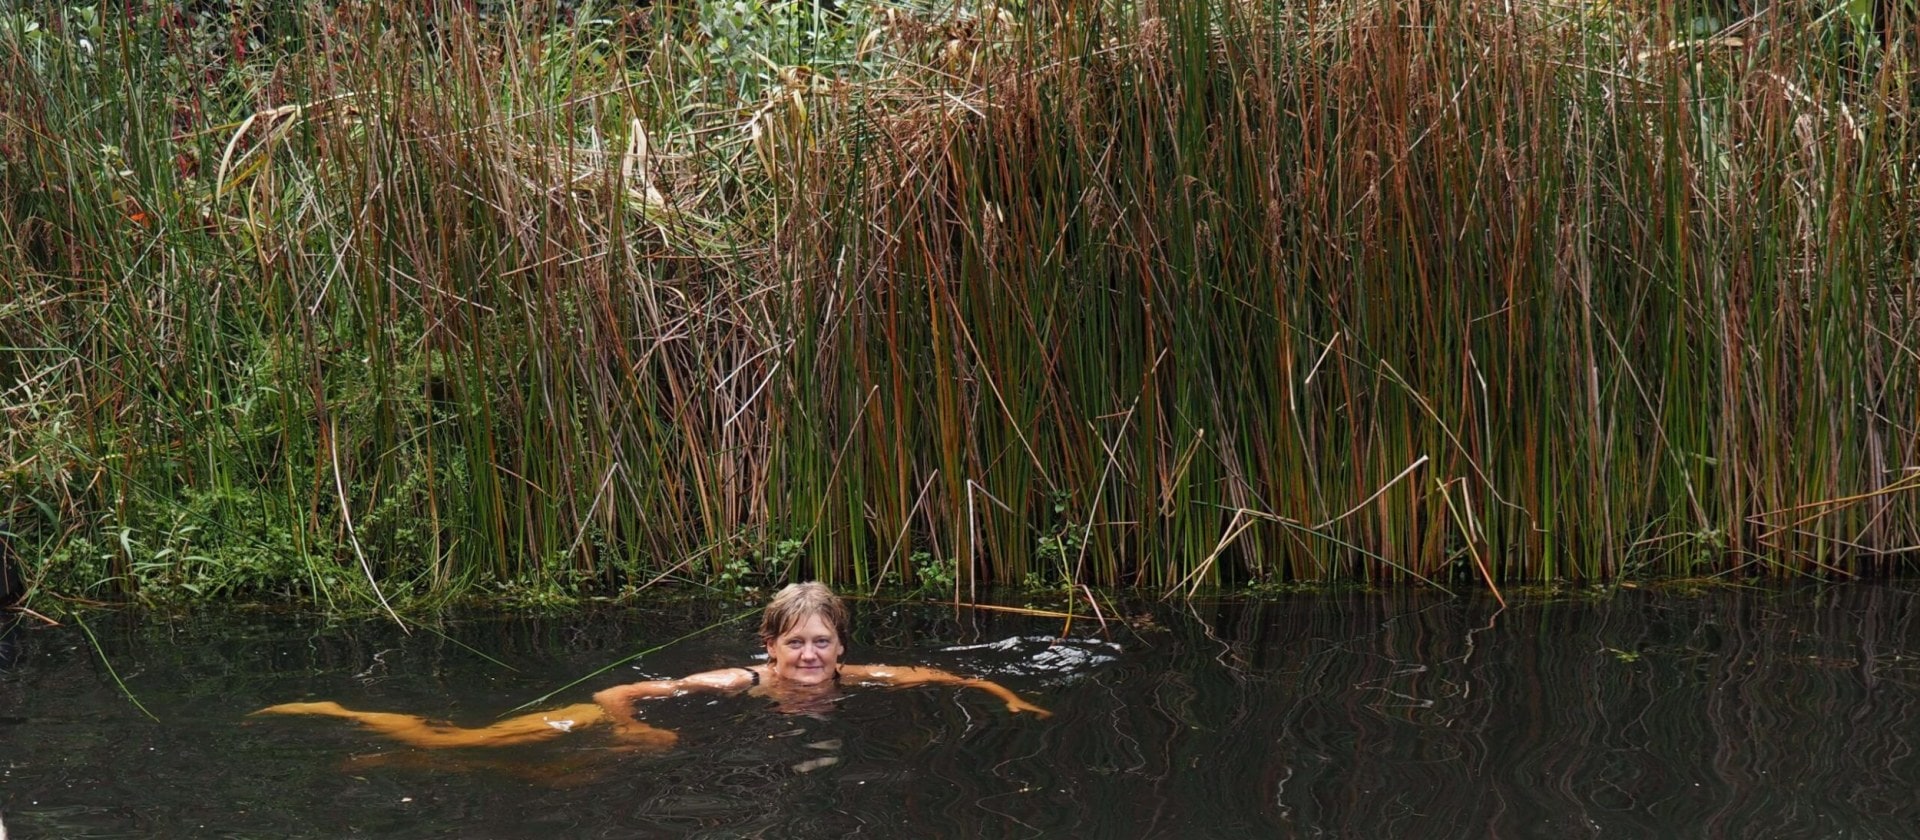 Annette Lees swimming in outdoor water